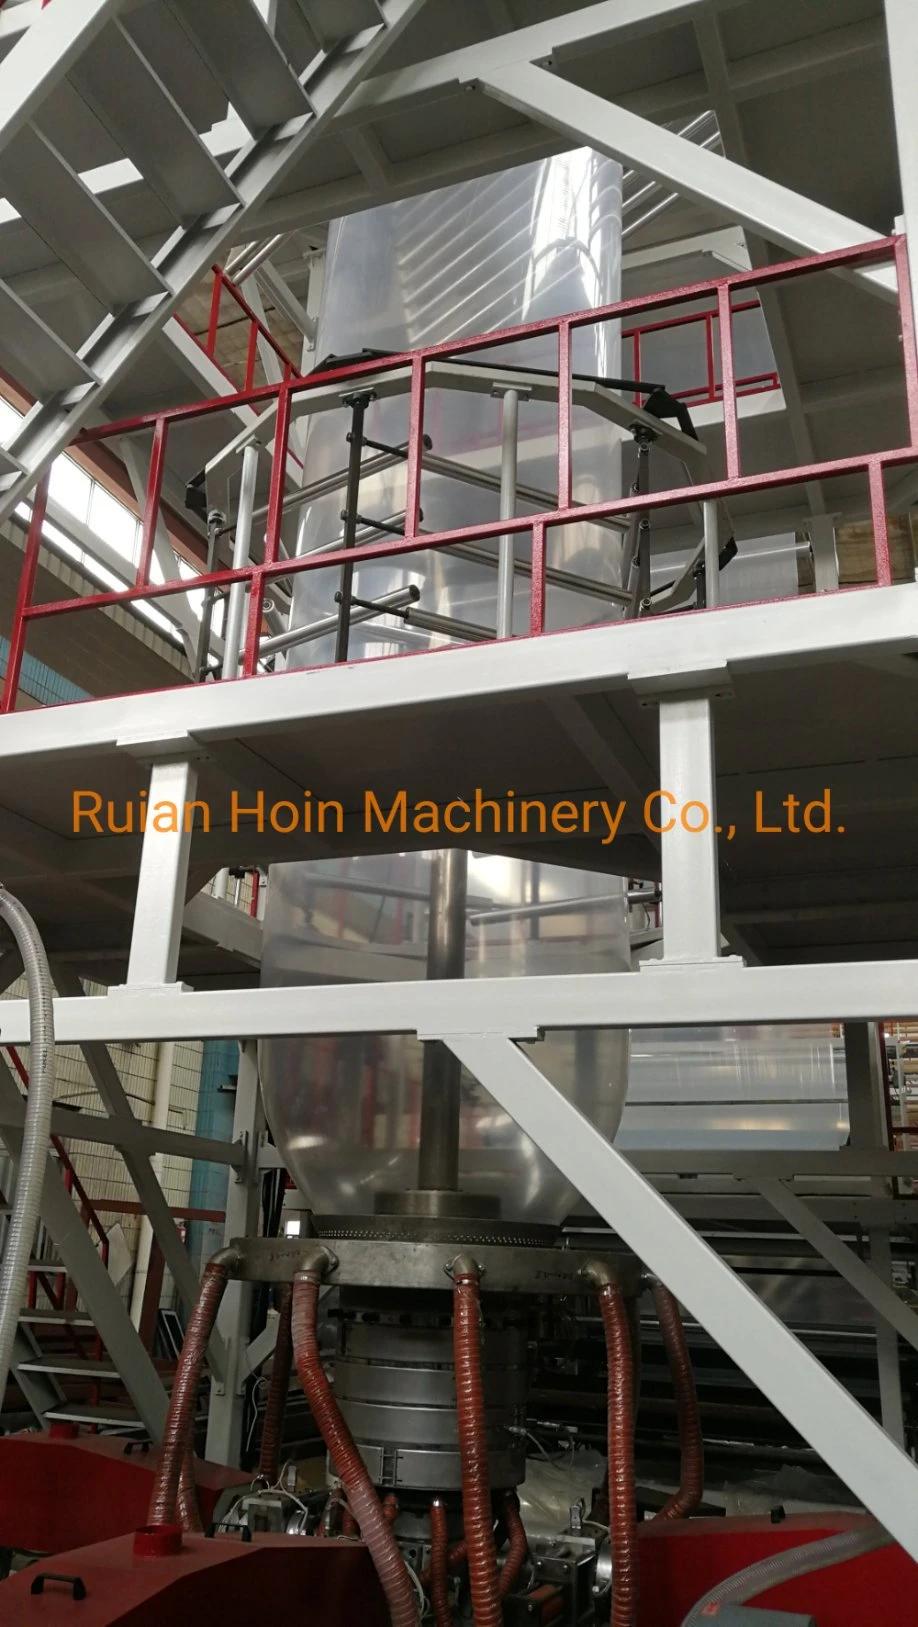 Three-to-Seven Layer Co-Extrusion Traction Film Blowing Machine